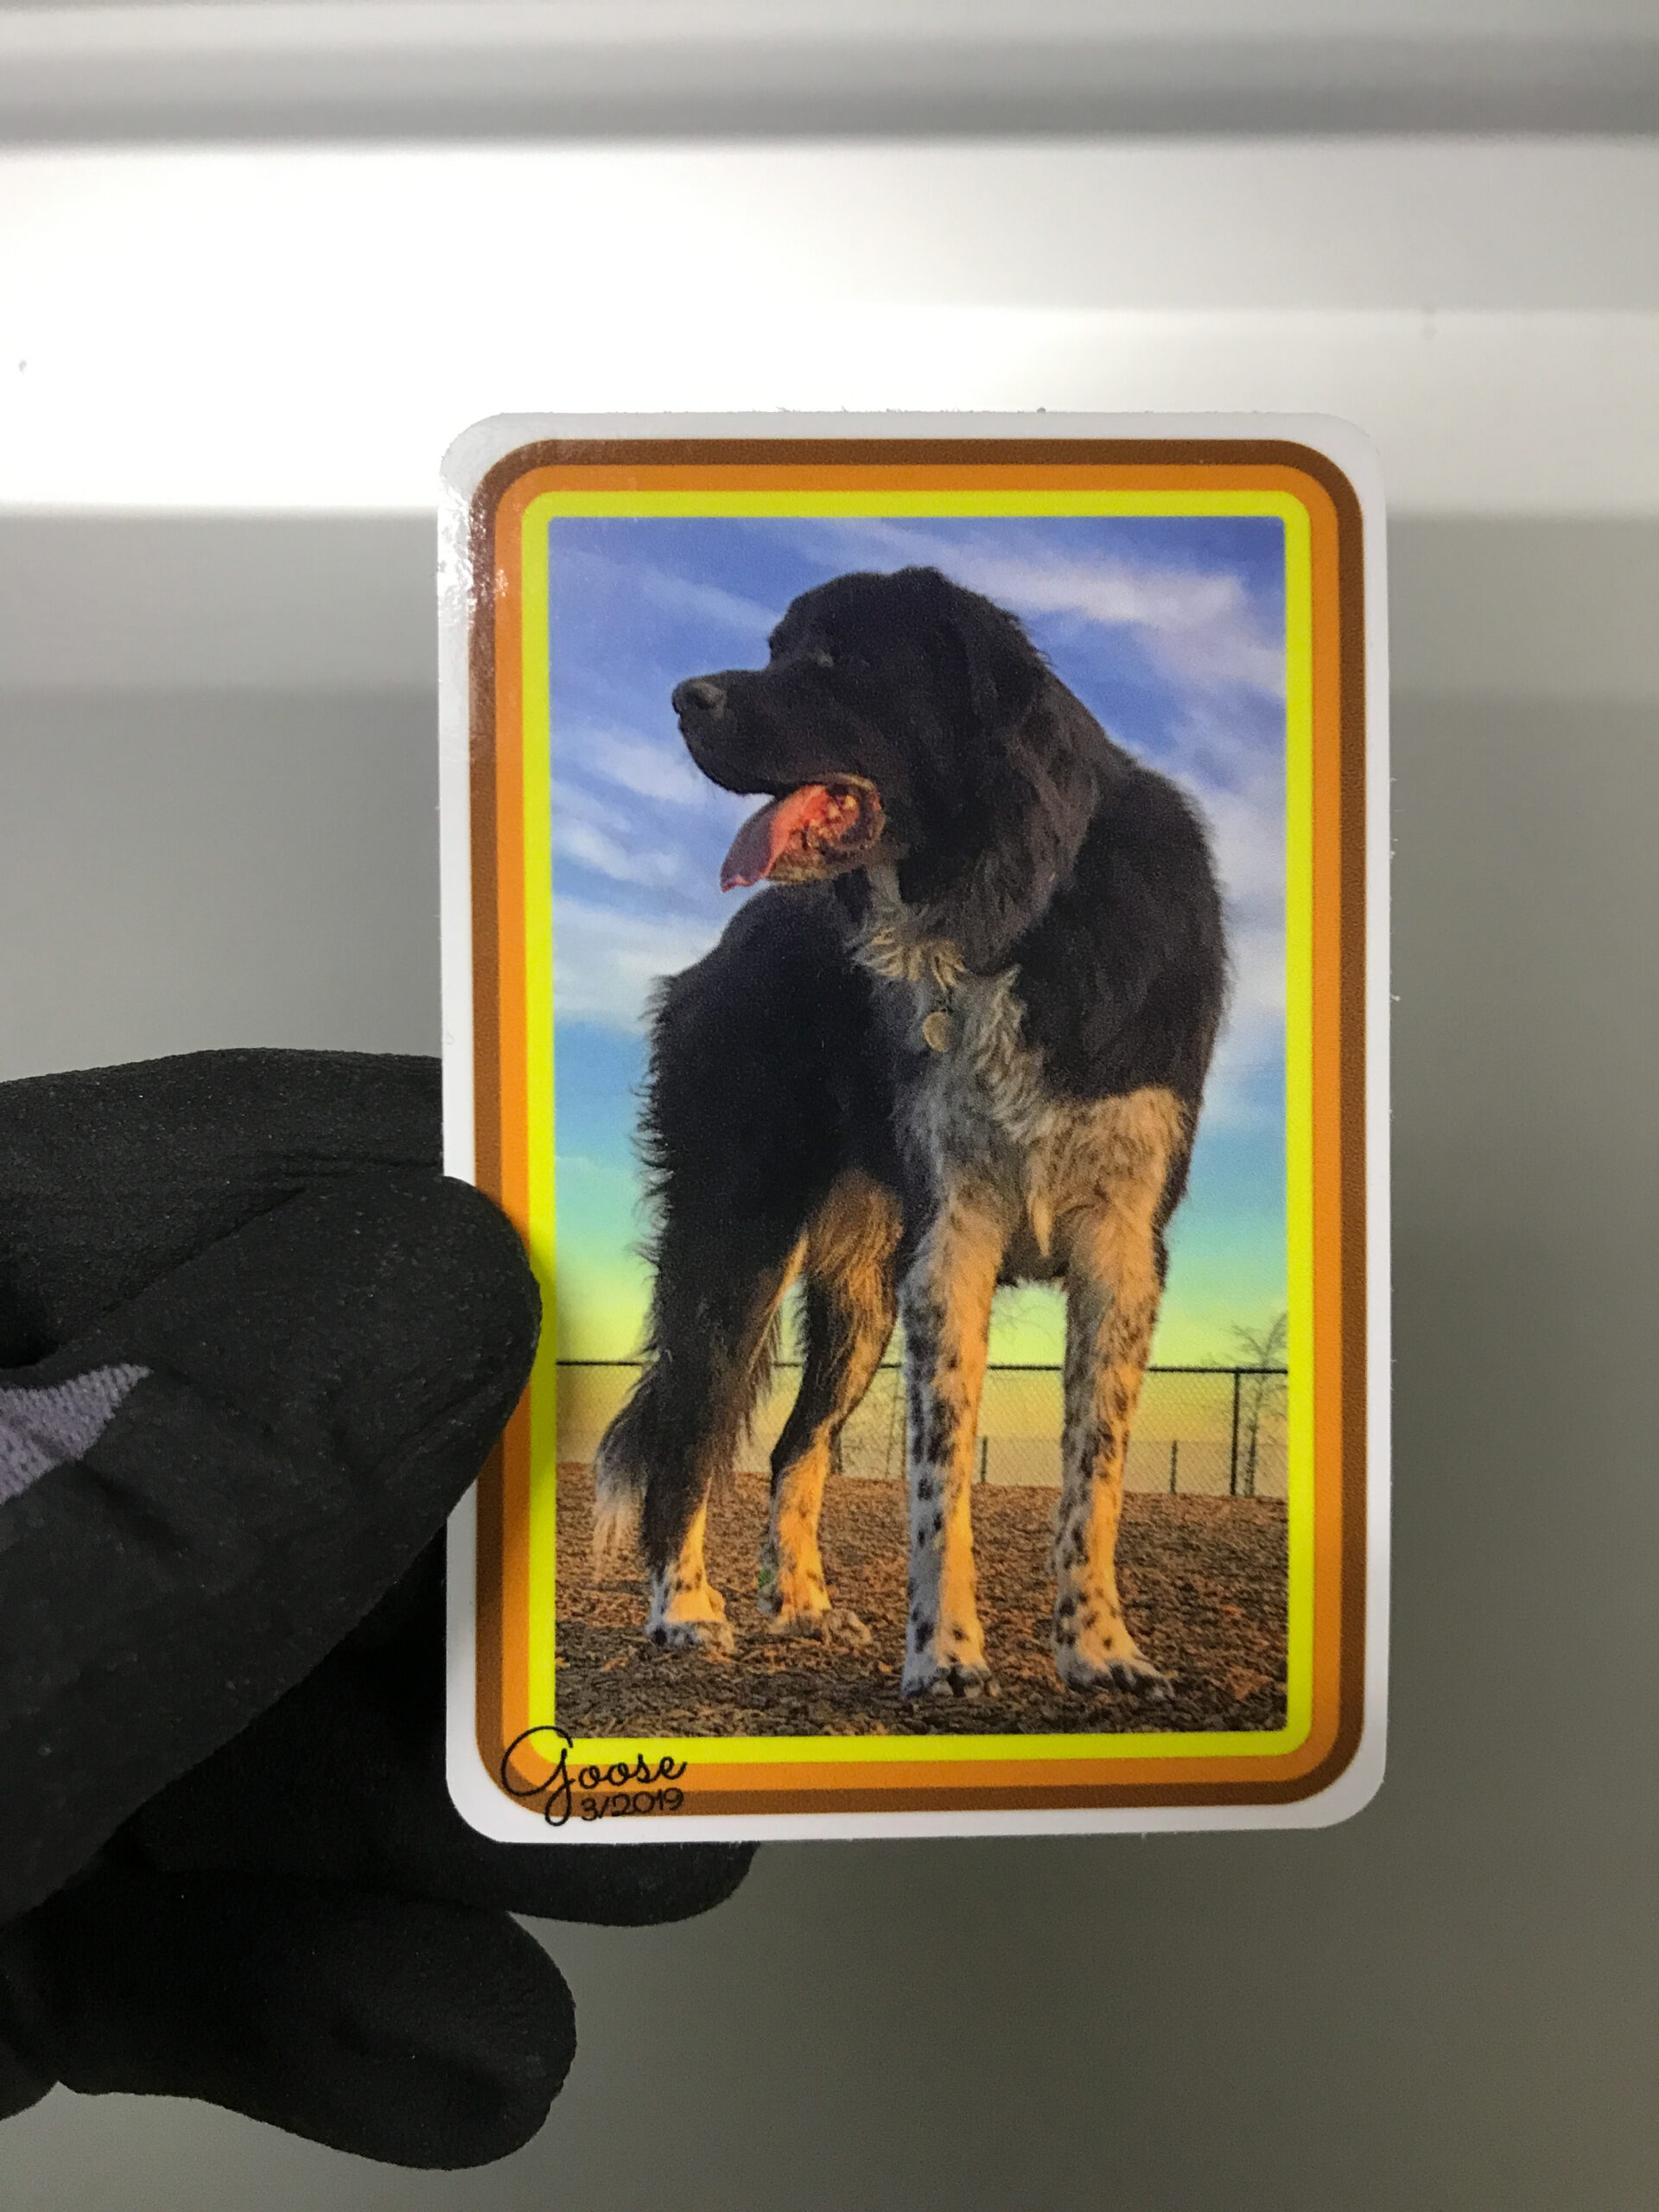 a photographic sticker of a good dog named Goose.